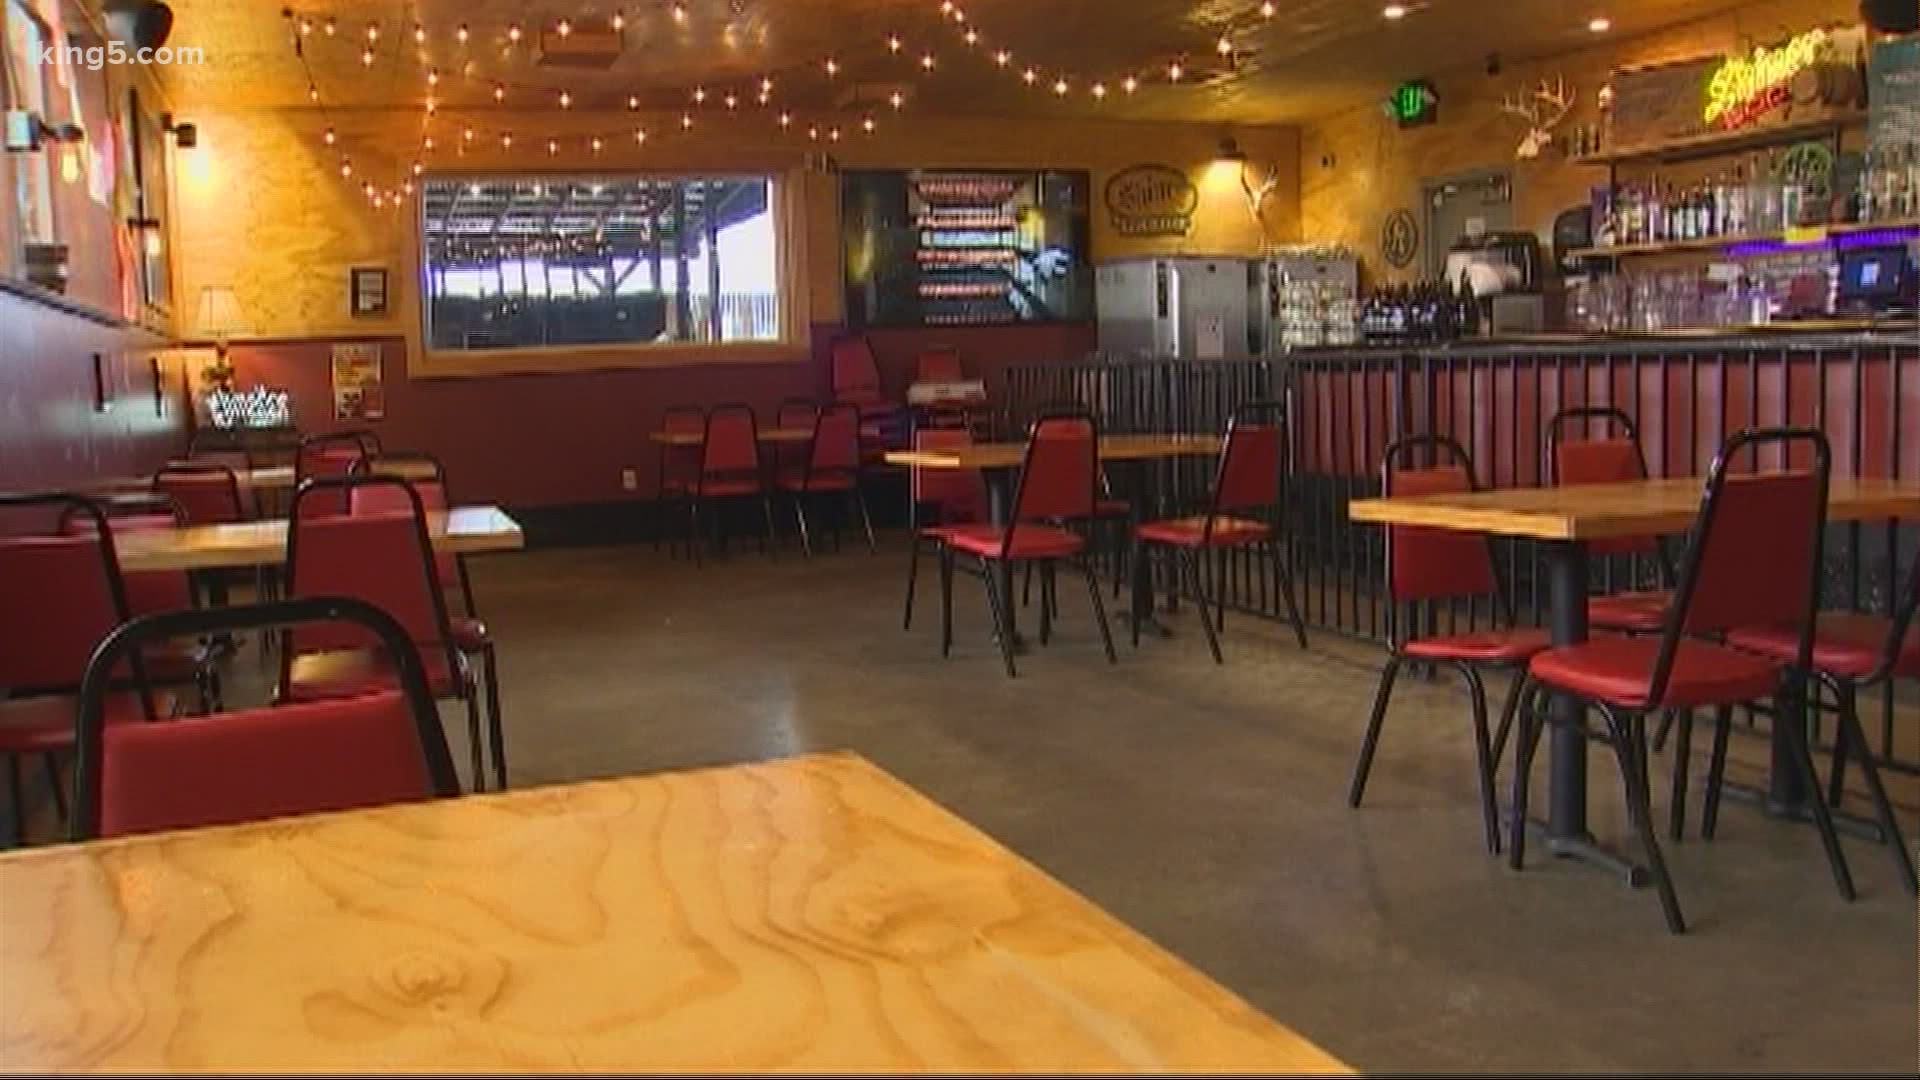 Restaurant owners say people are favoring outdoor seating. They're also making changes to capacity and ordering food.